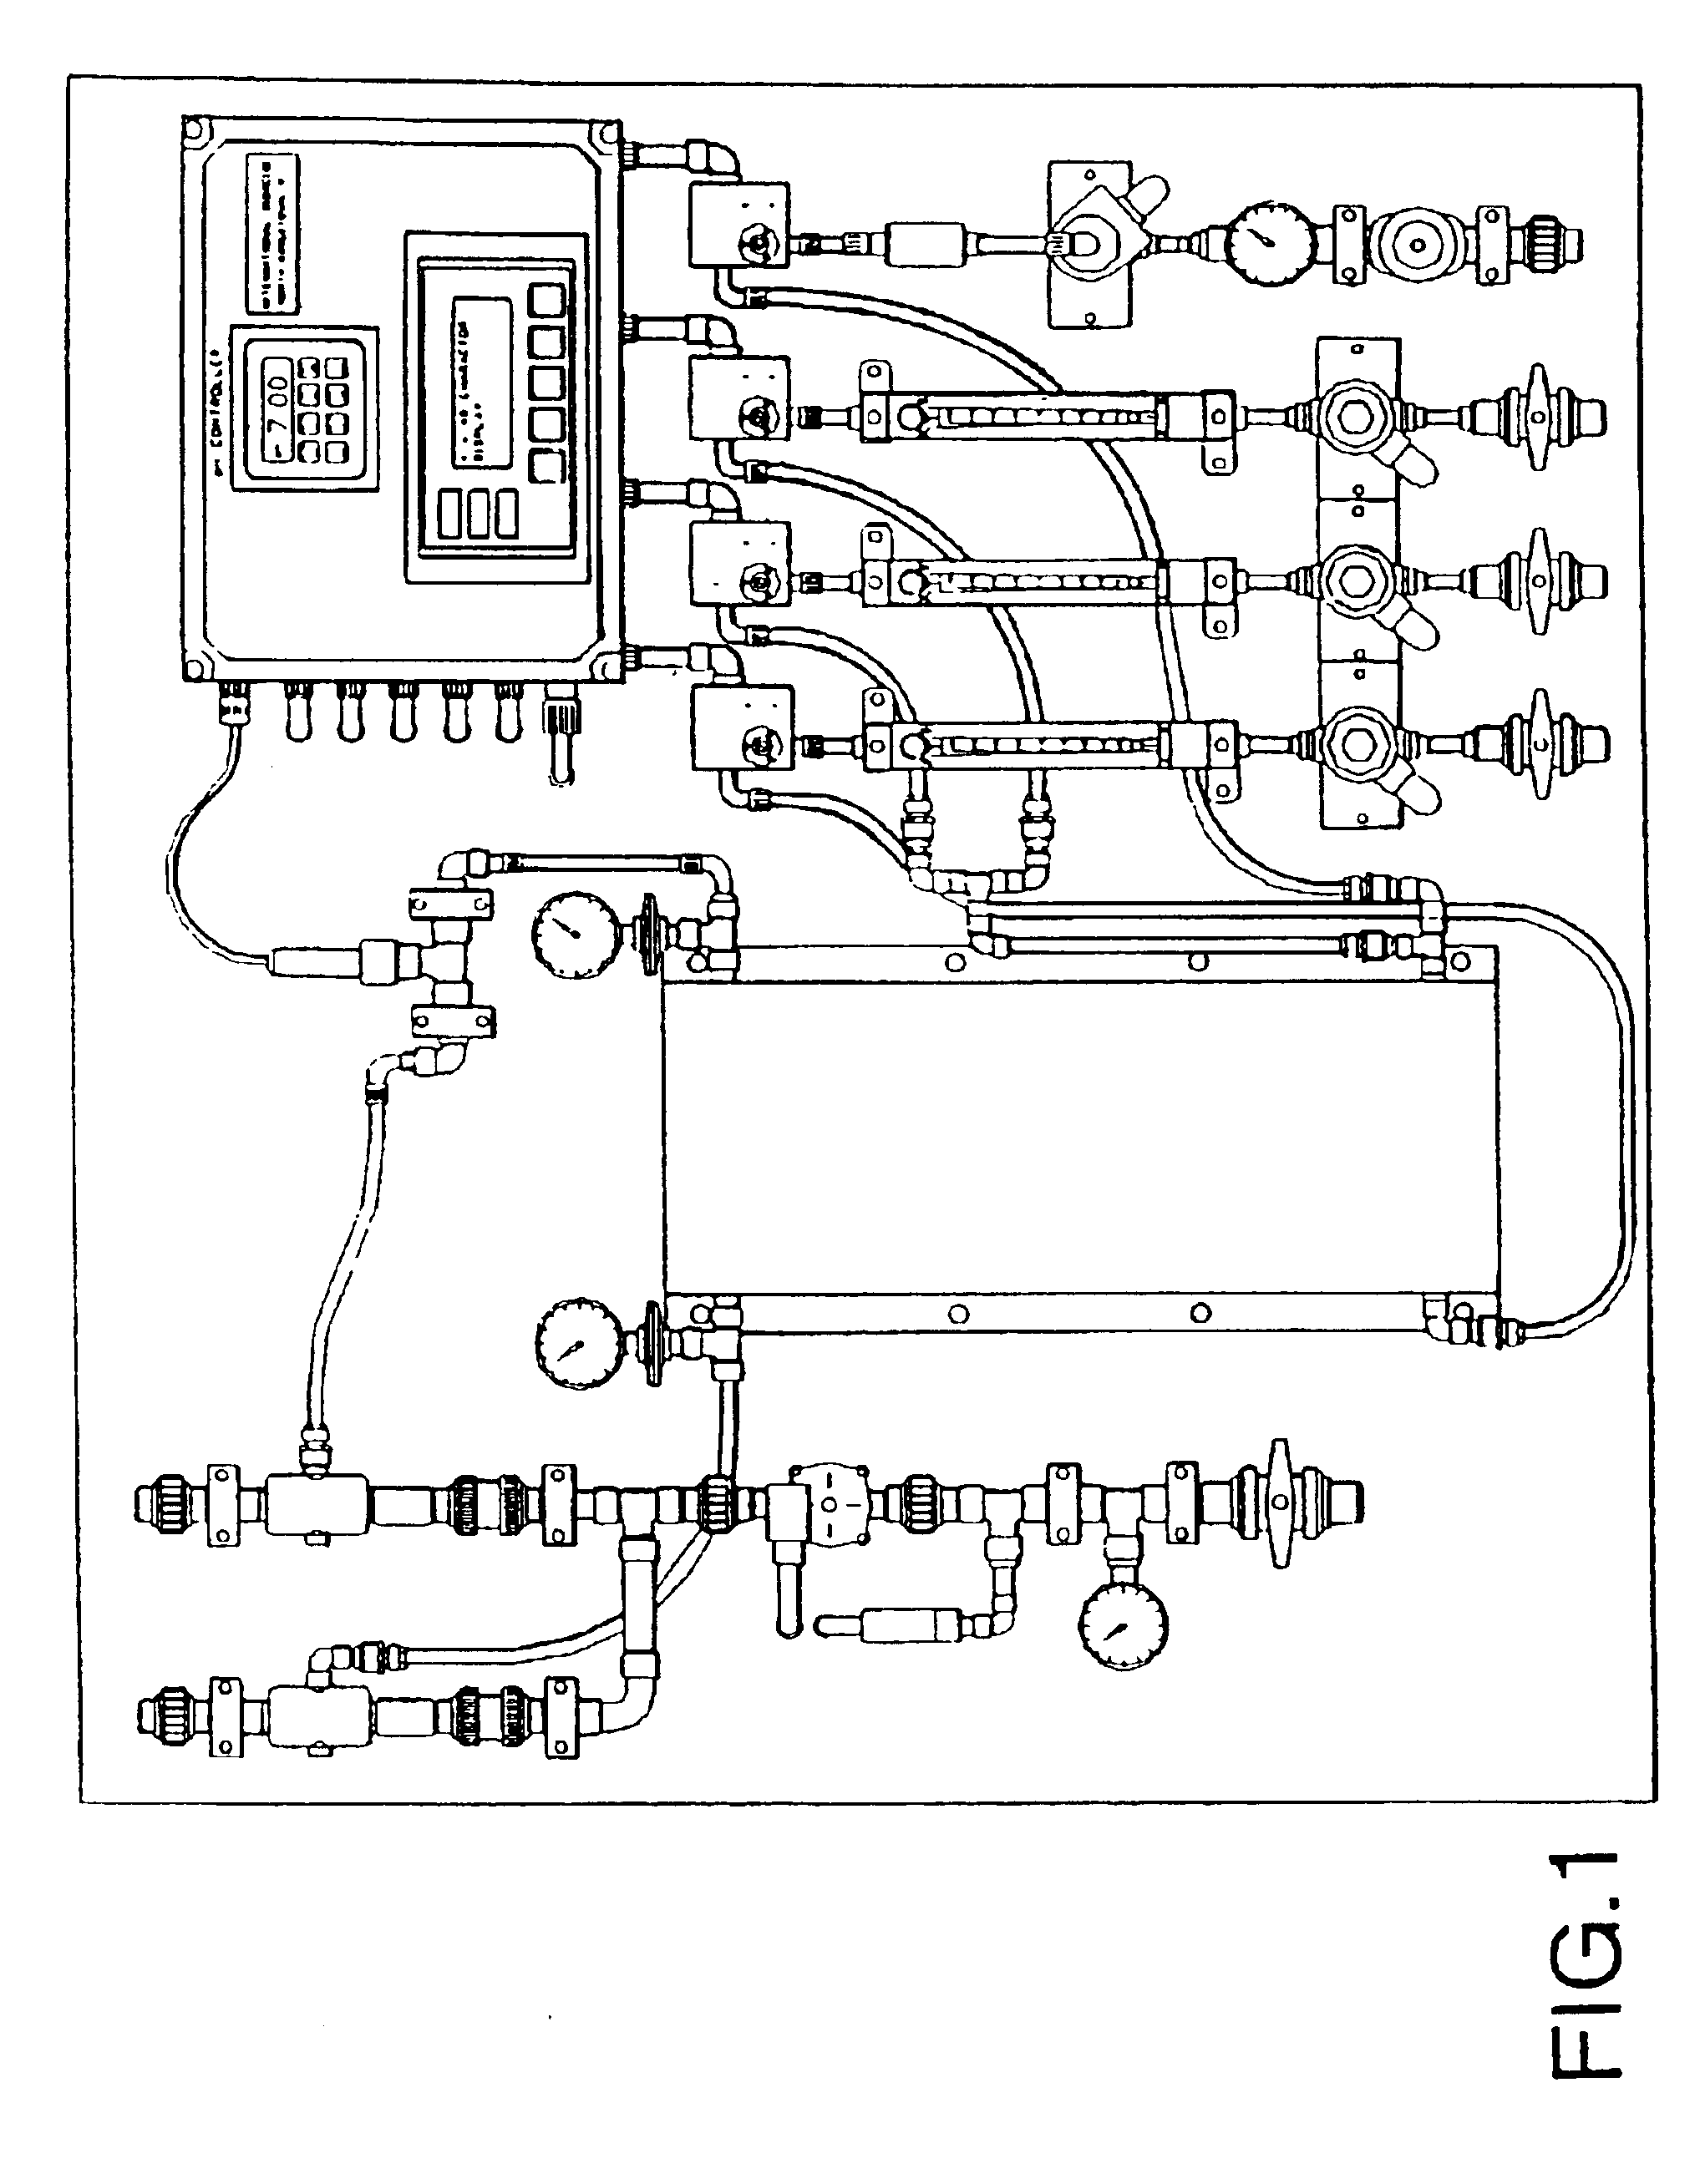 Generator for generating chlorine dioxide under vacuum eduction in a single pass